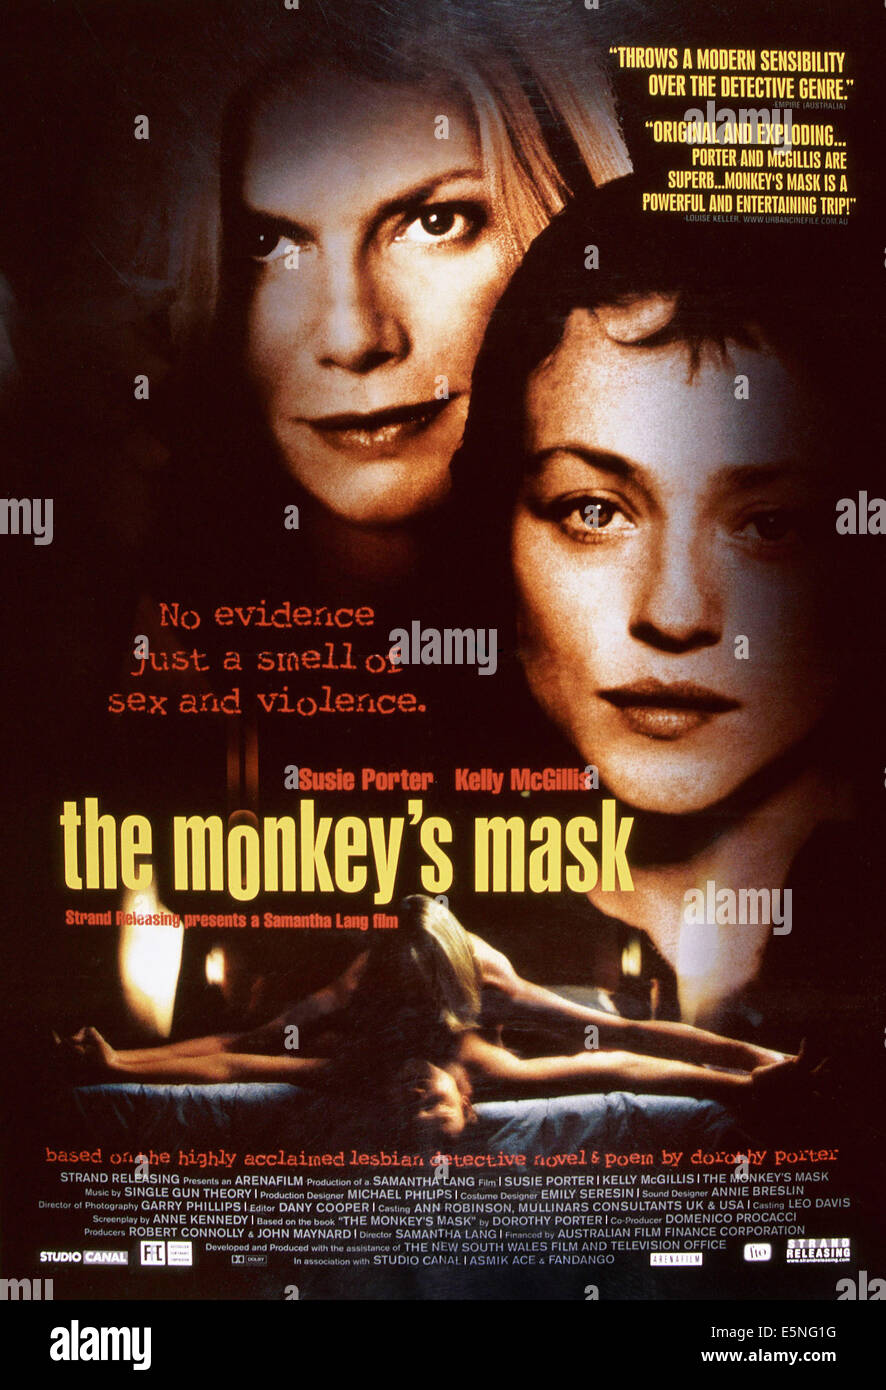 THE MONKEY'S MASK, from left: Kelly McGillis, Susie Porter, 2000, © Strand Releasing/courtesy Everett Collection Stock Photo